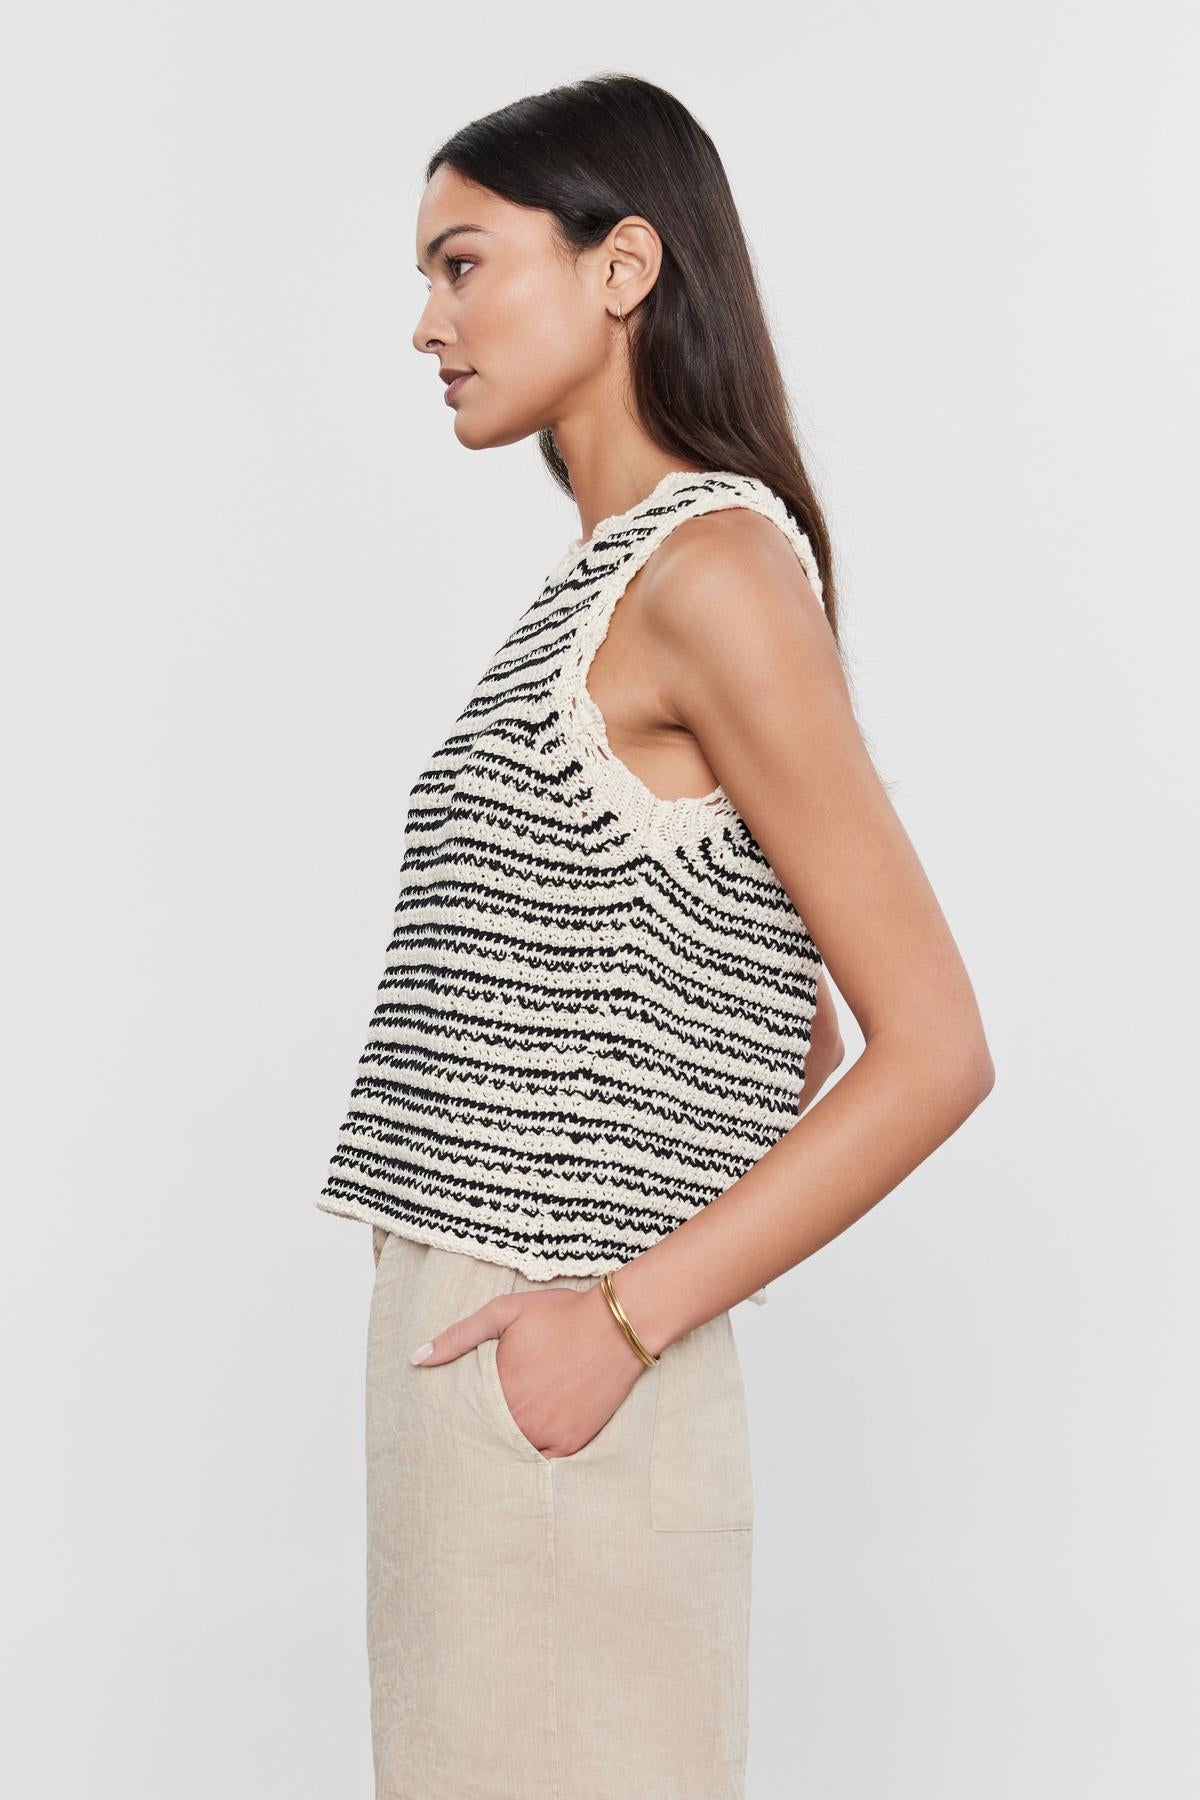 Side profile of a woman in a sleeveless, striped SOPHIE SWEATER VEST with scallop details and beige trousers against a white background by Velvet by Graham & Spencer.-36910013710529